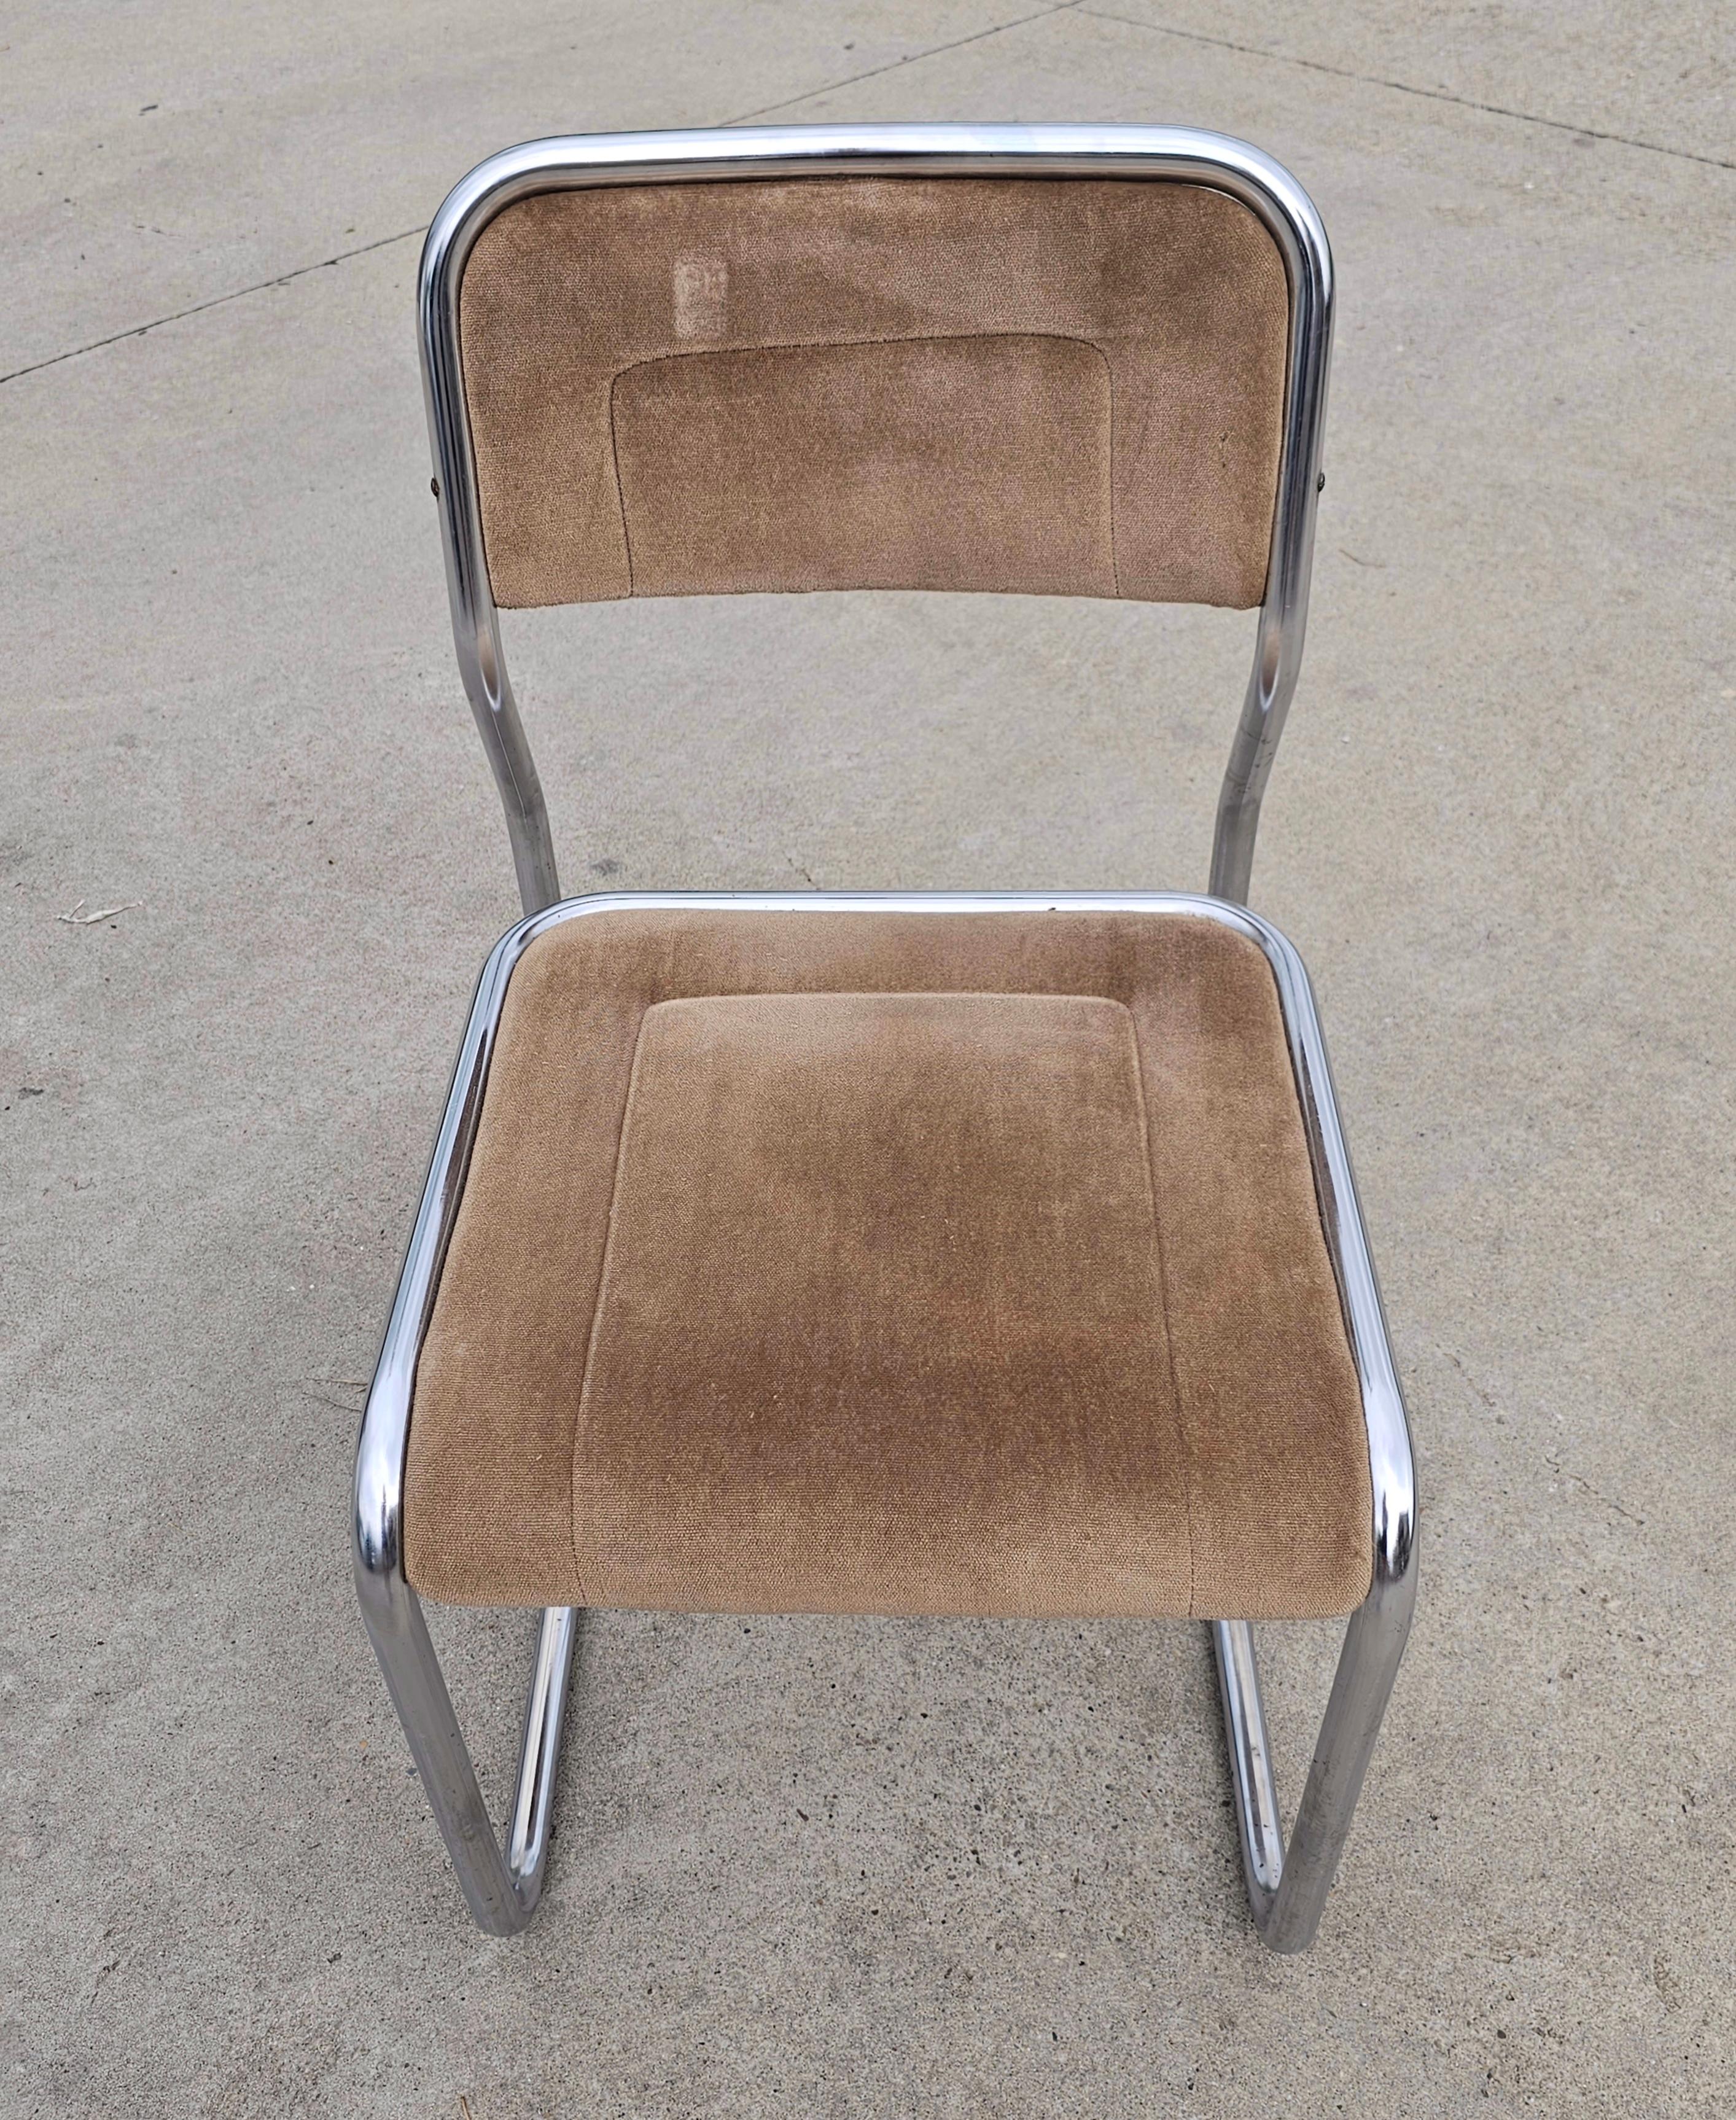 Italian 1 of 2 Bauhaus Cantilever Dining Chairs with Infinity Frame, Italy 1970s For Sale